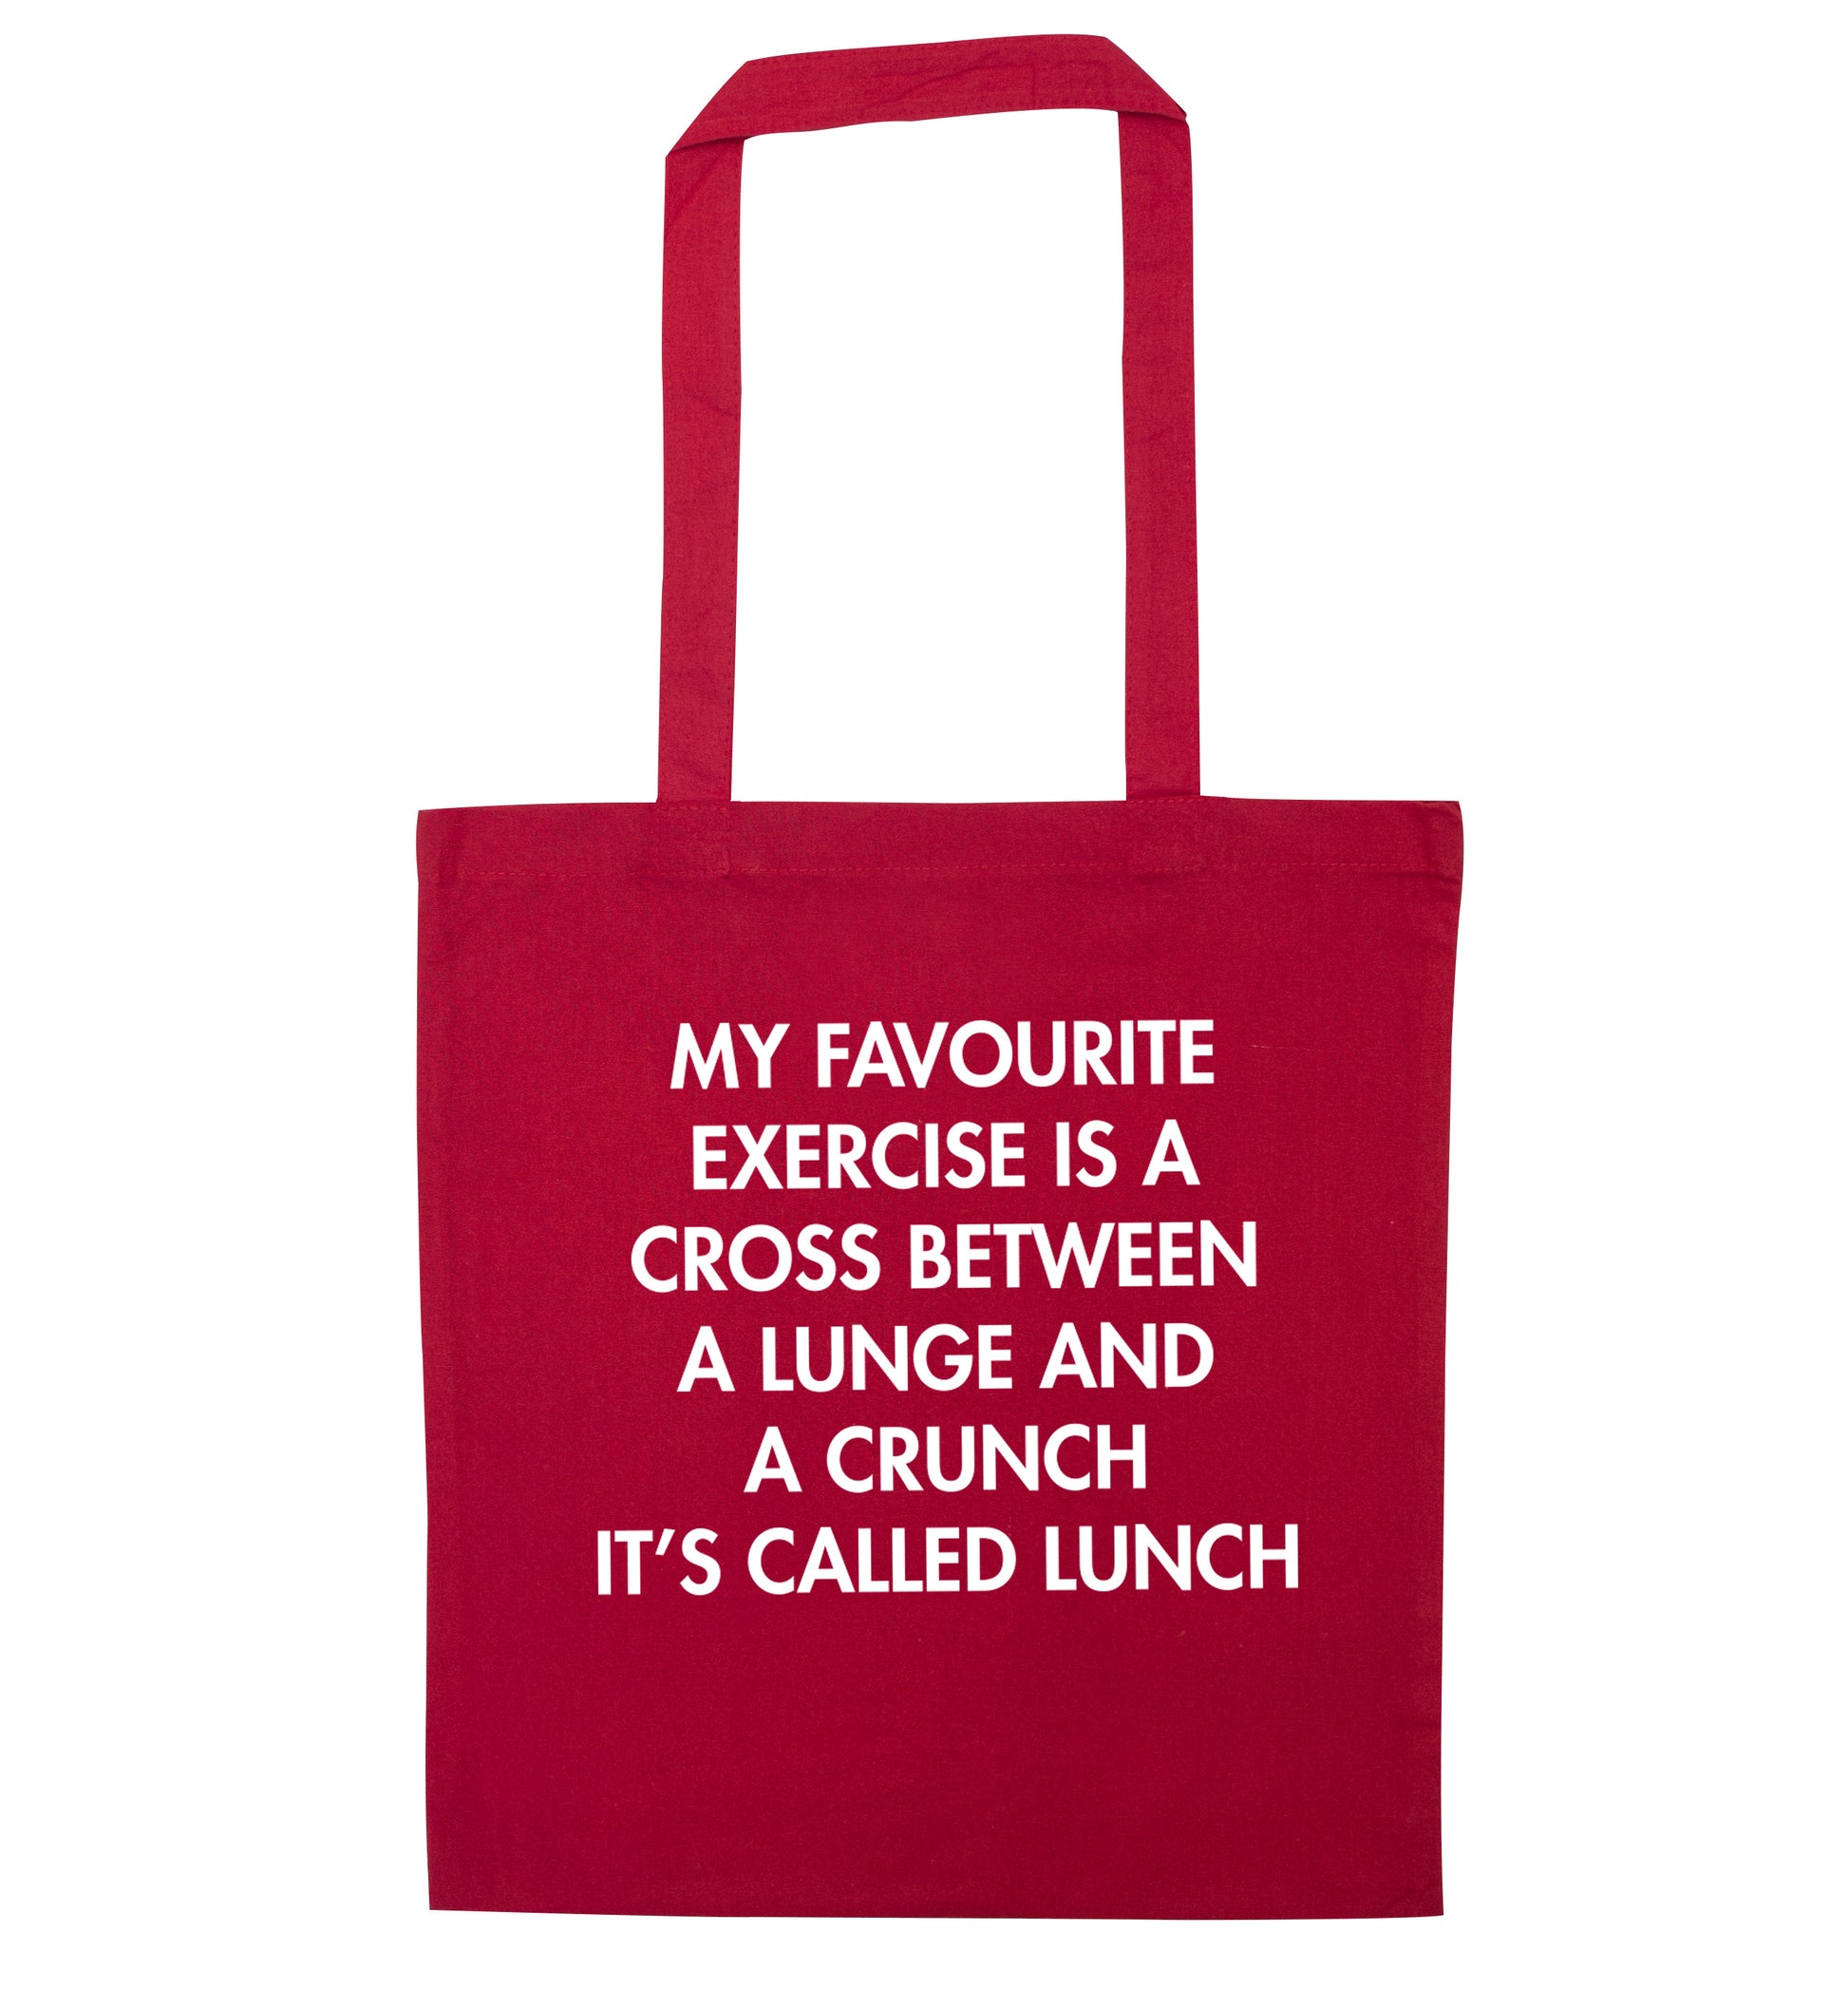 My favourite exercise is a cross between a lung and a crunch it's called lunch red tote bag